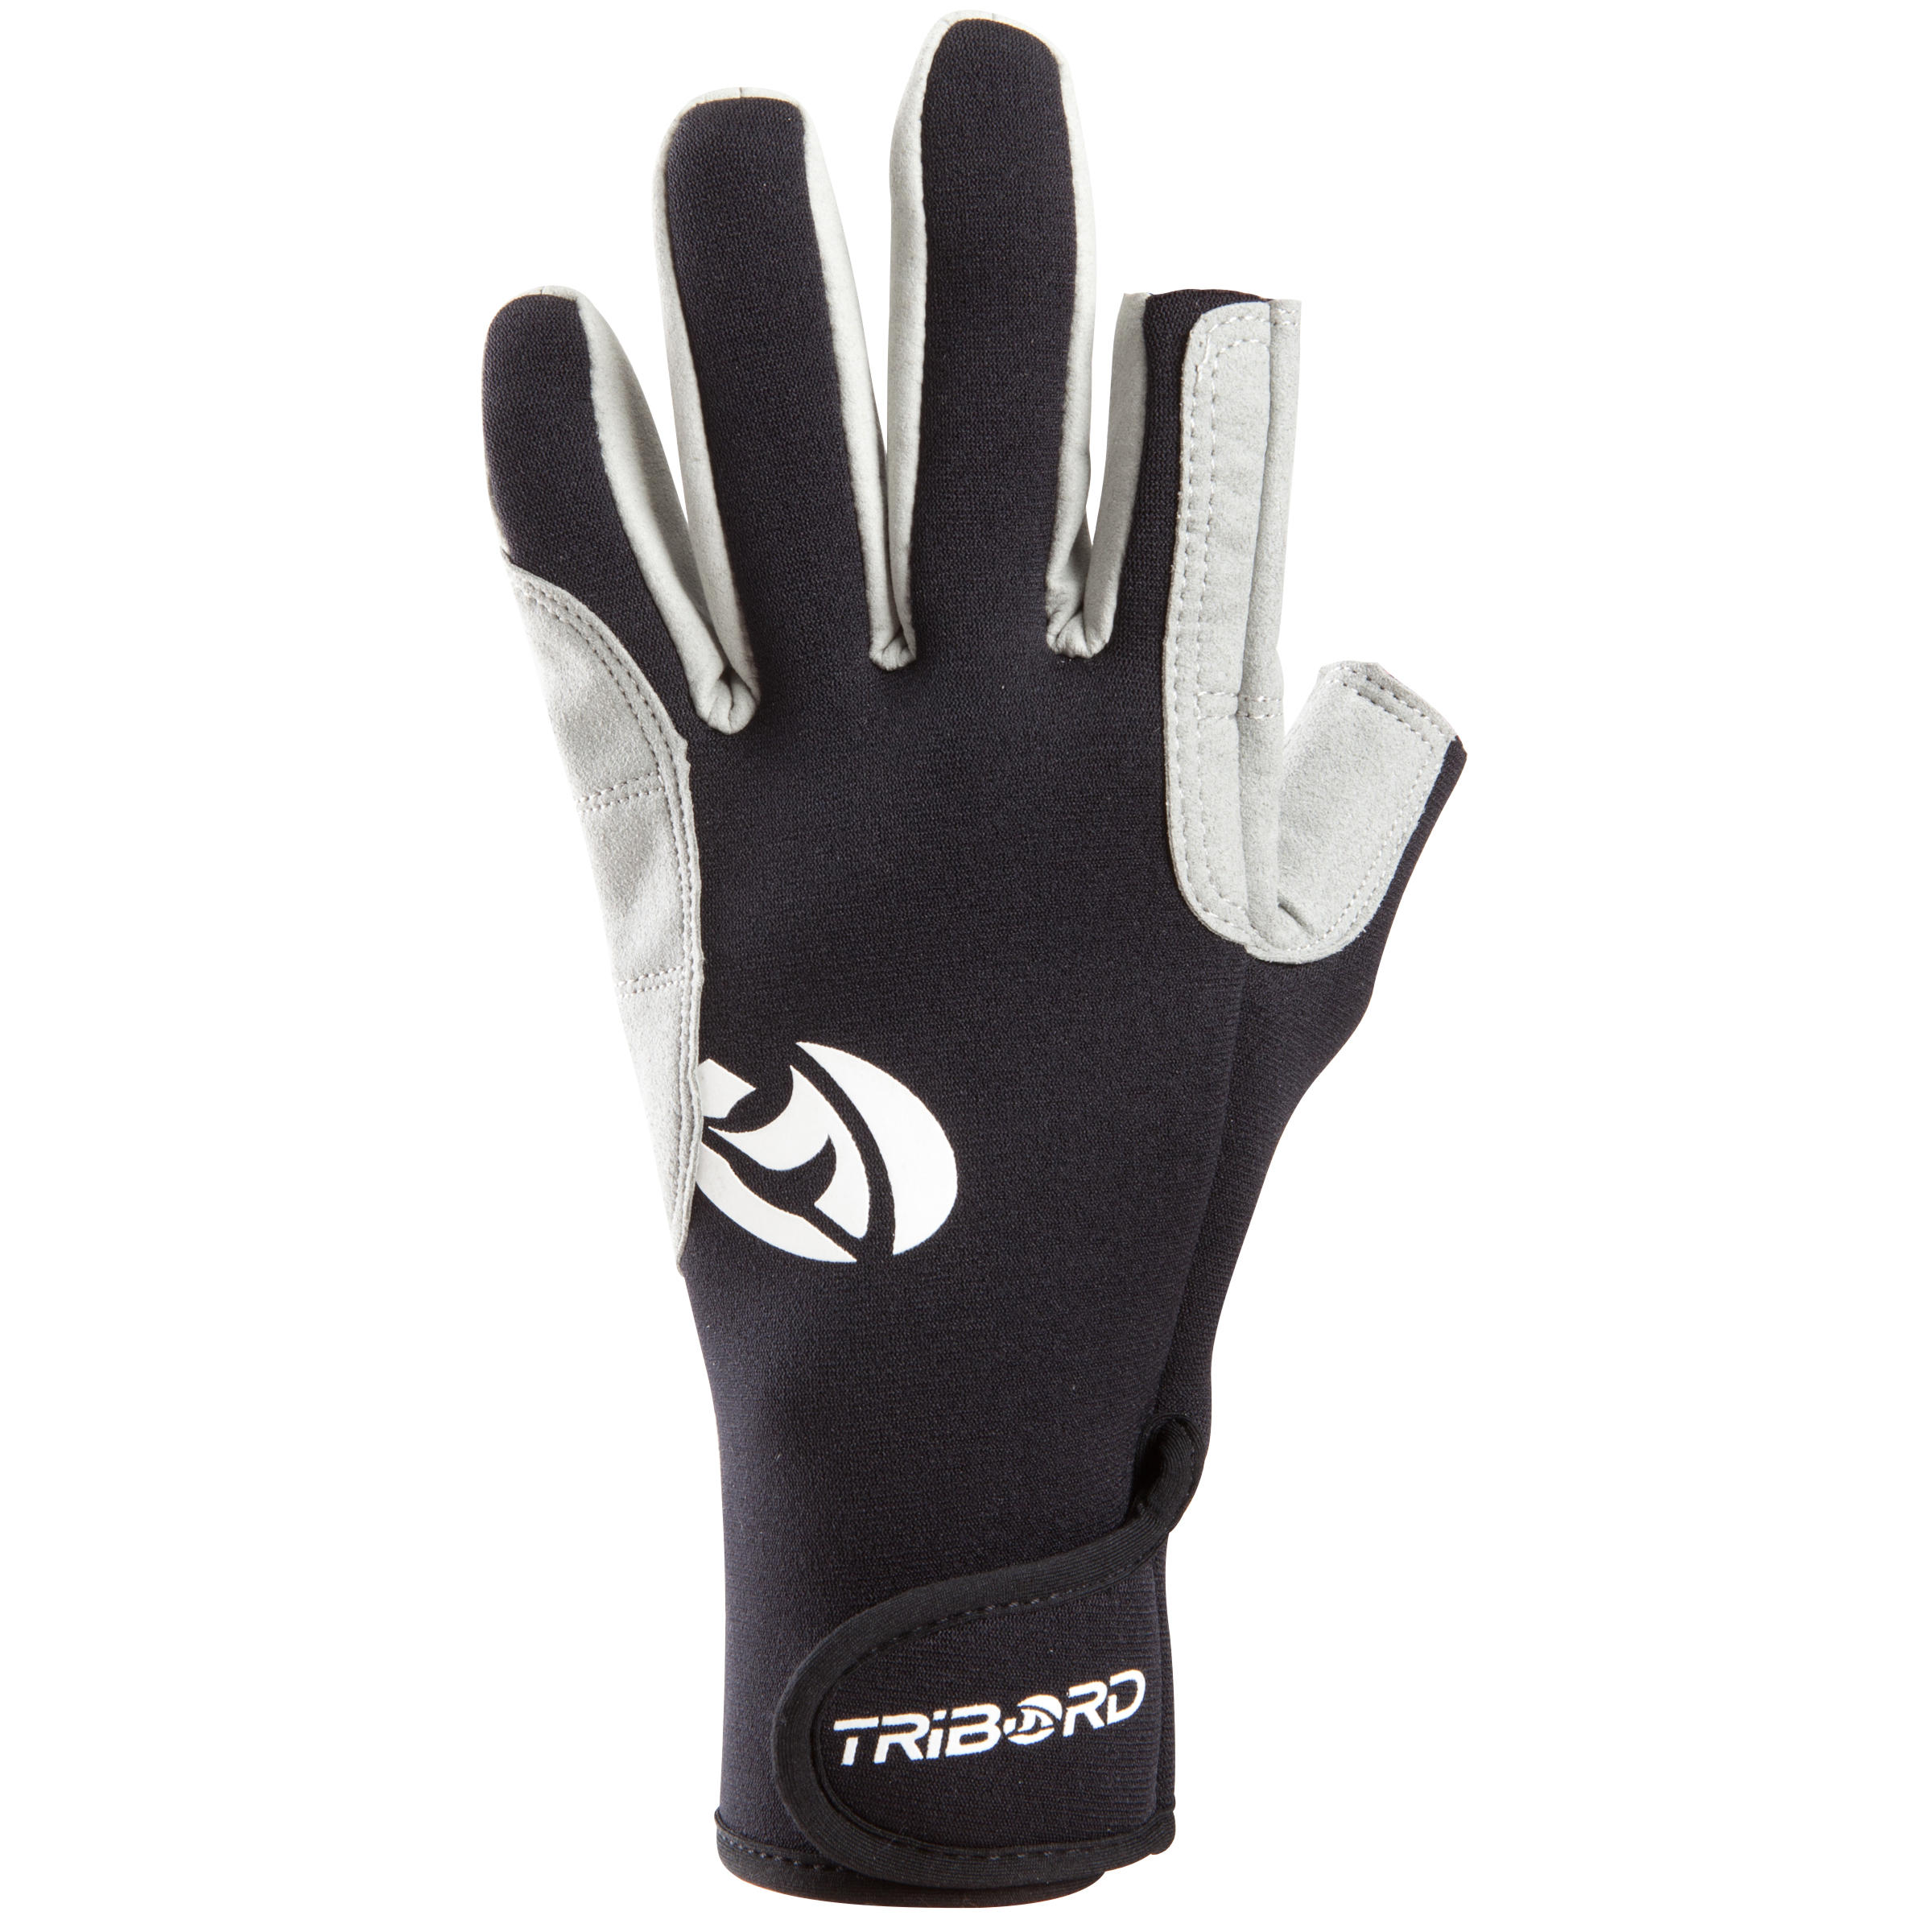 TRIBORD Fingerless index and thumb gloves for yacht, dinghy or catamaran sailing